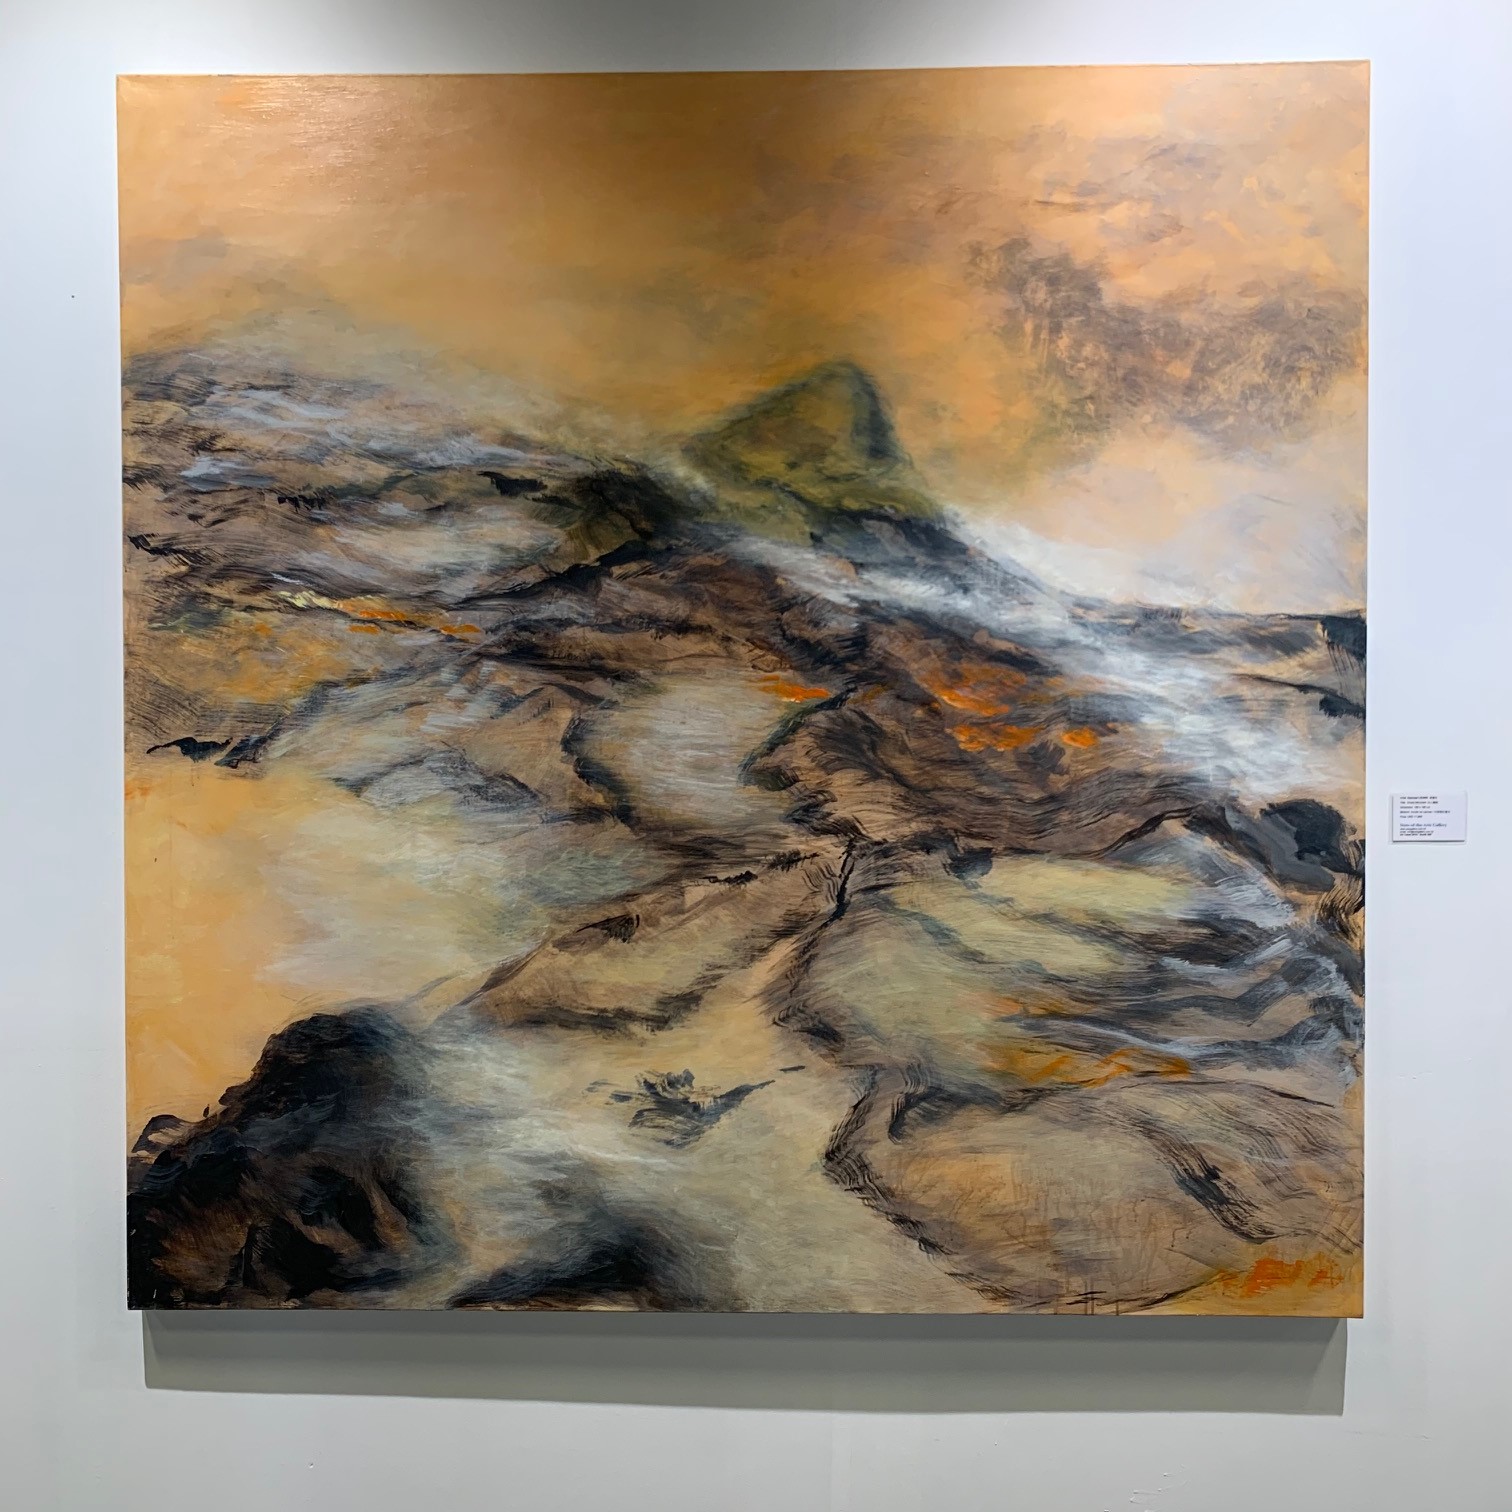 Mountain Muse, by Samues Leung, 2018, Mixed Media on Canvas, 180x180cm